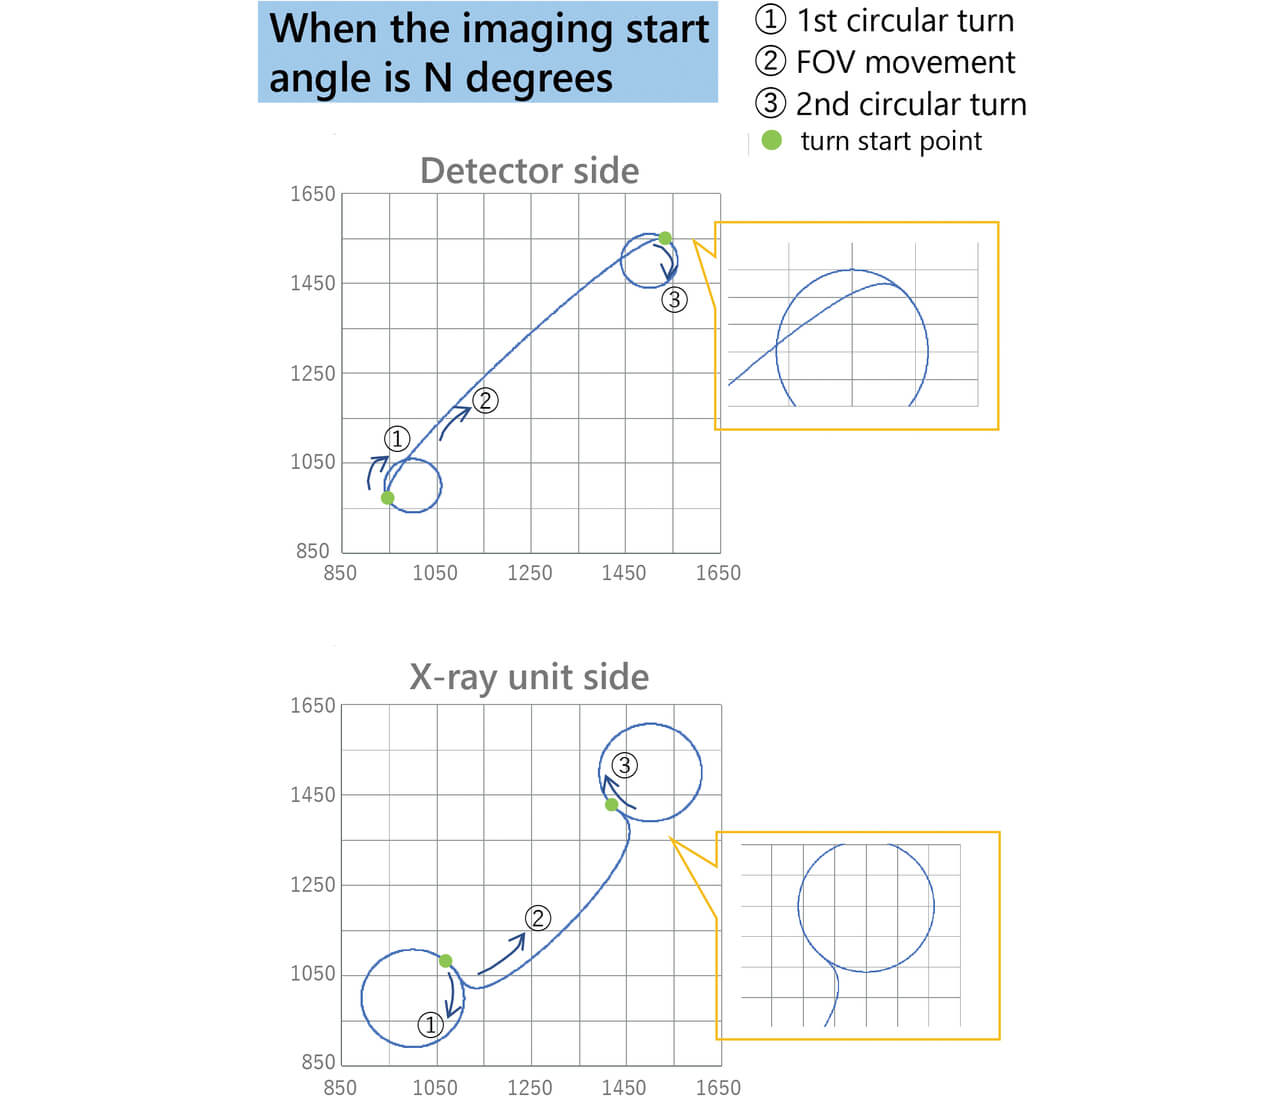 Fig. 10 Imaging starting point in the new technology - case of N°